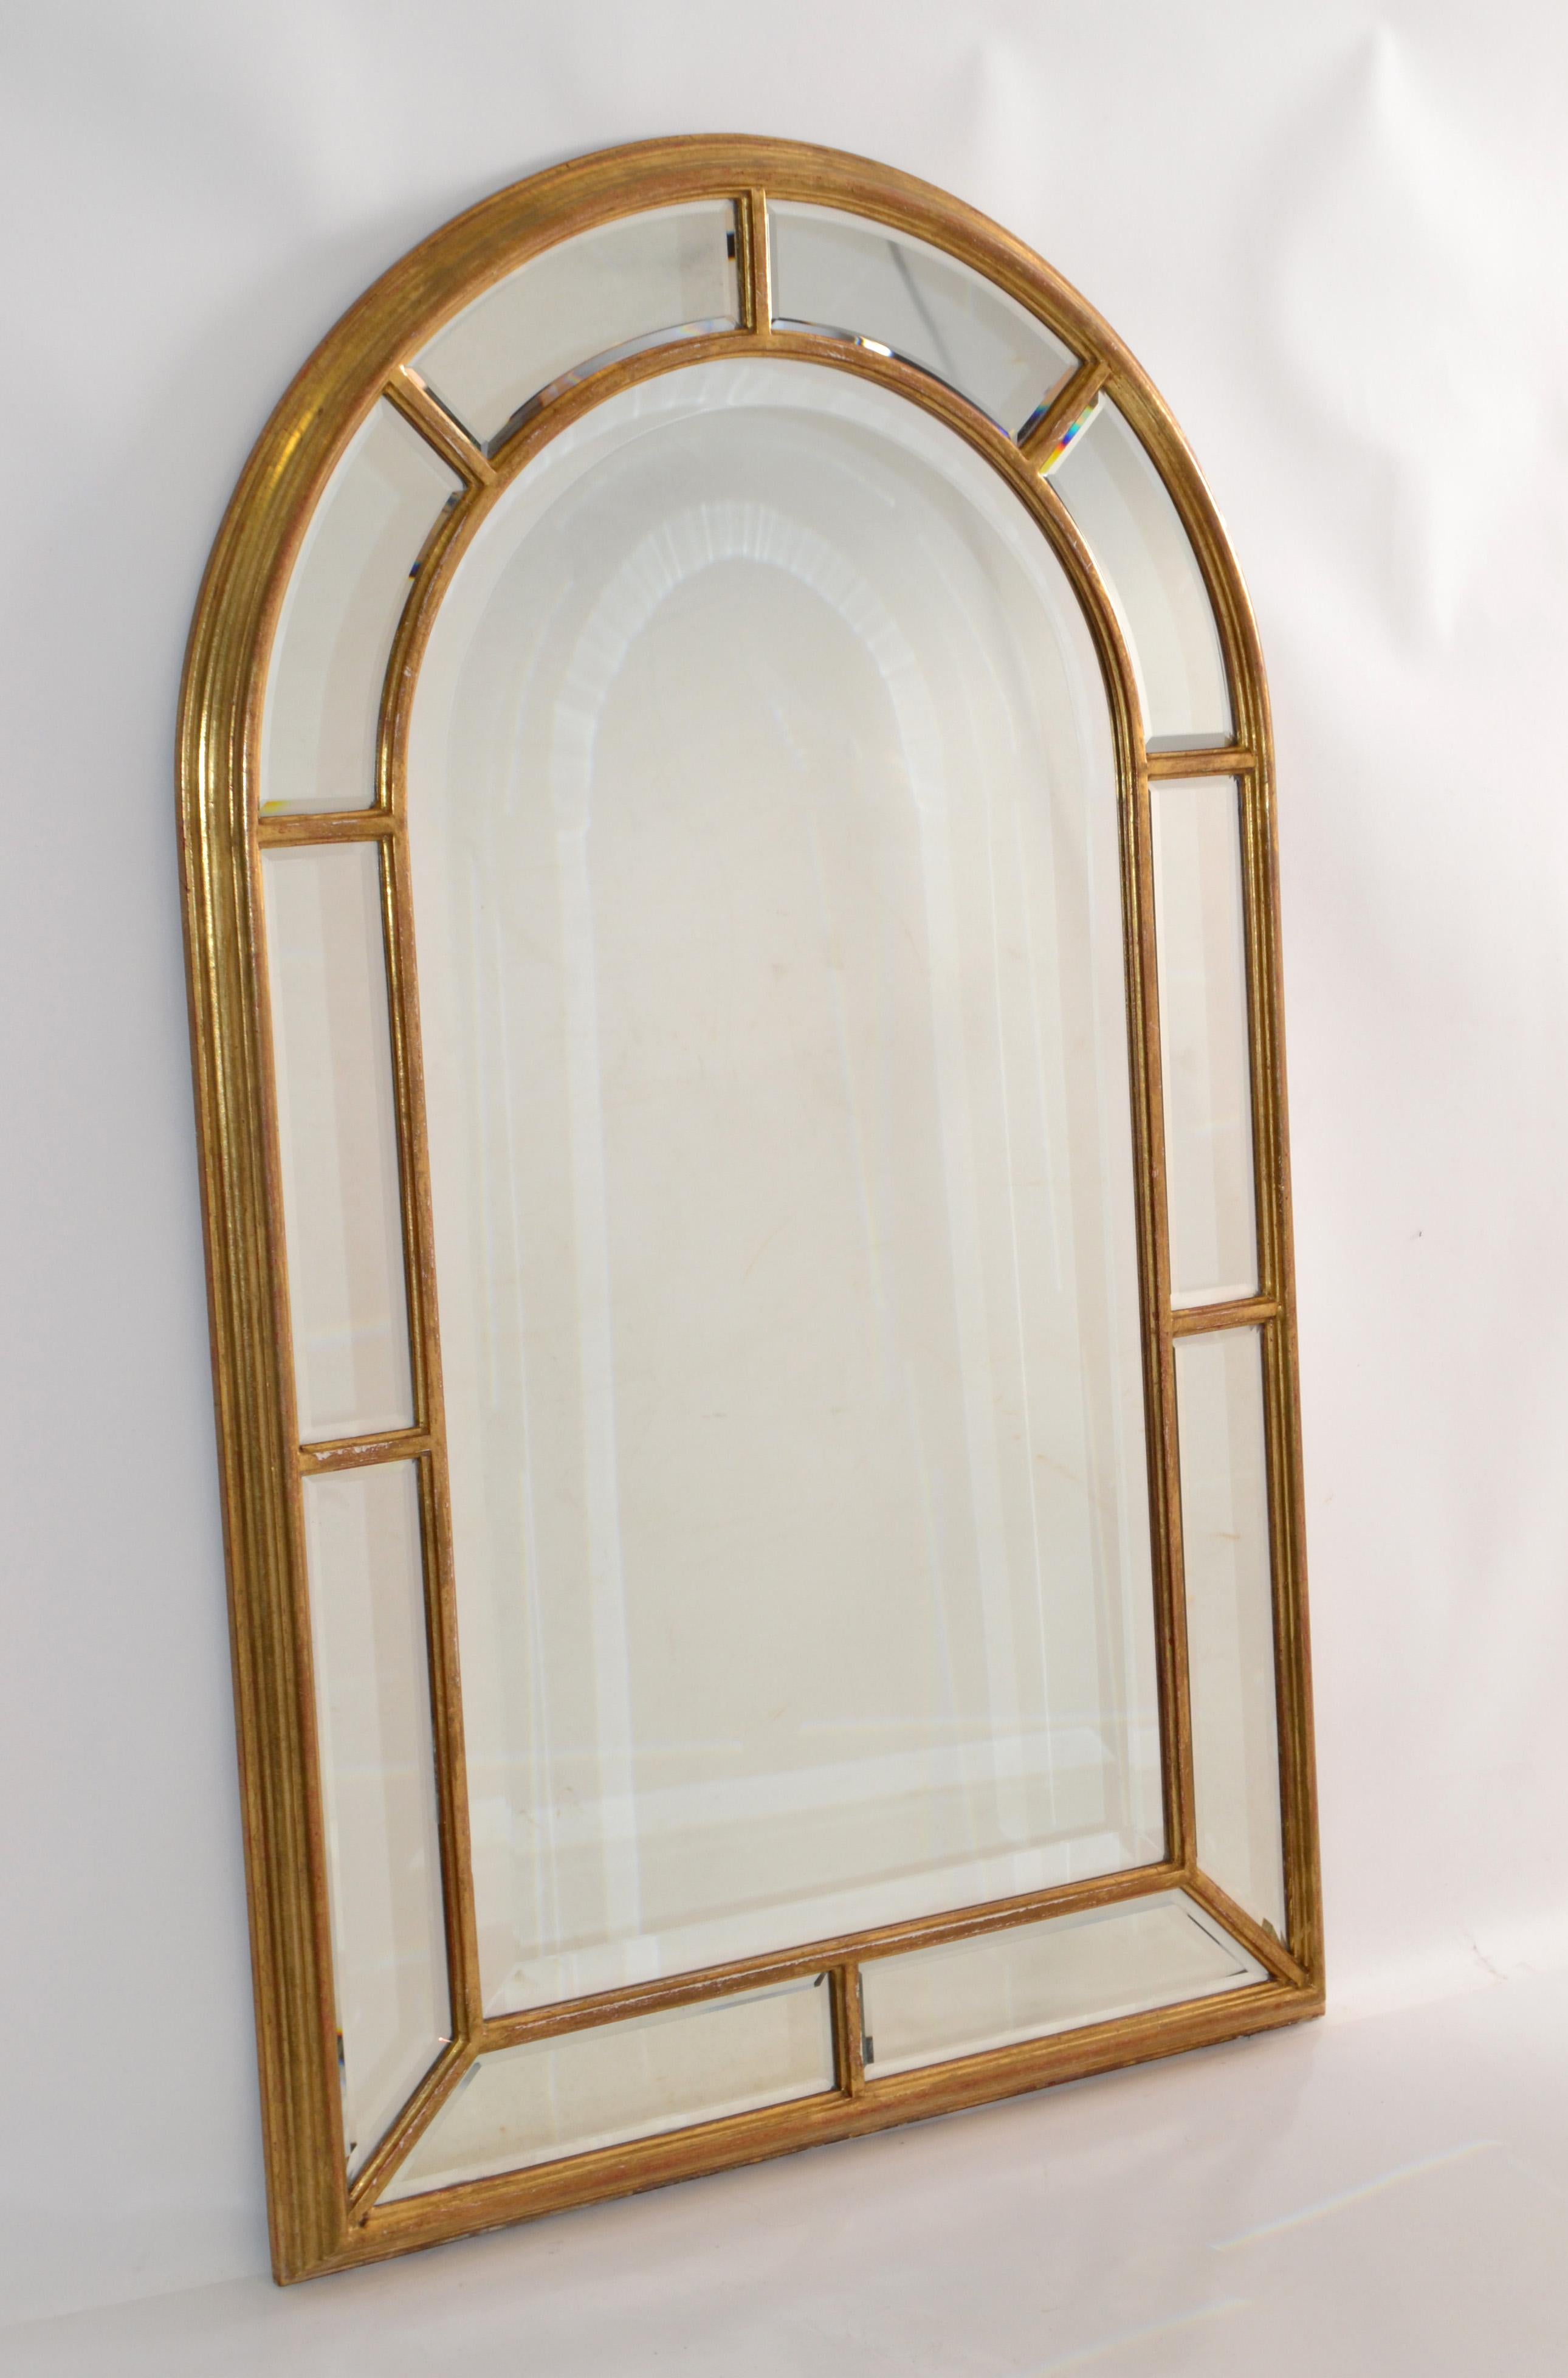 1970s Arch Shaped Italian Firenze Beveled Glass Wall Mirror with Gilt Wood Frame In Good Condition For Sale In Miami, FL